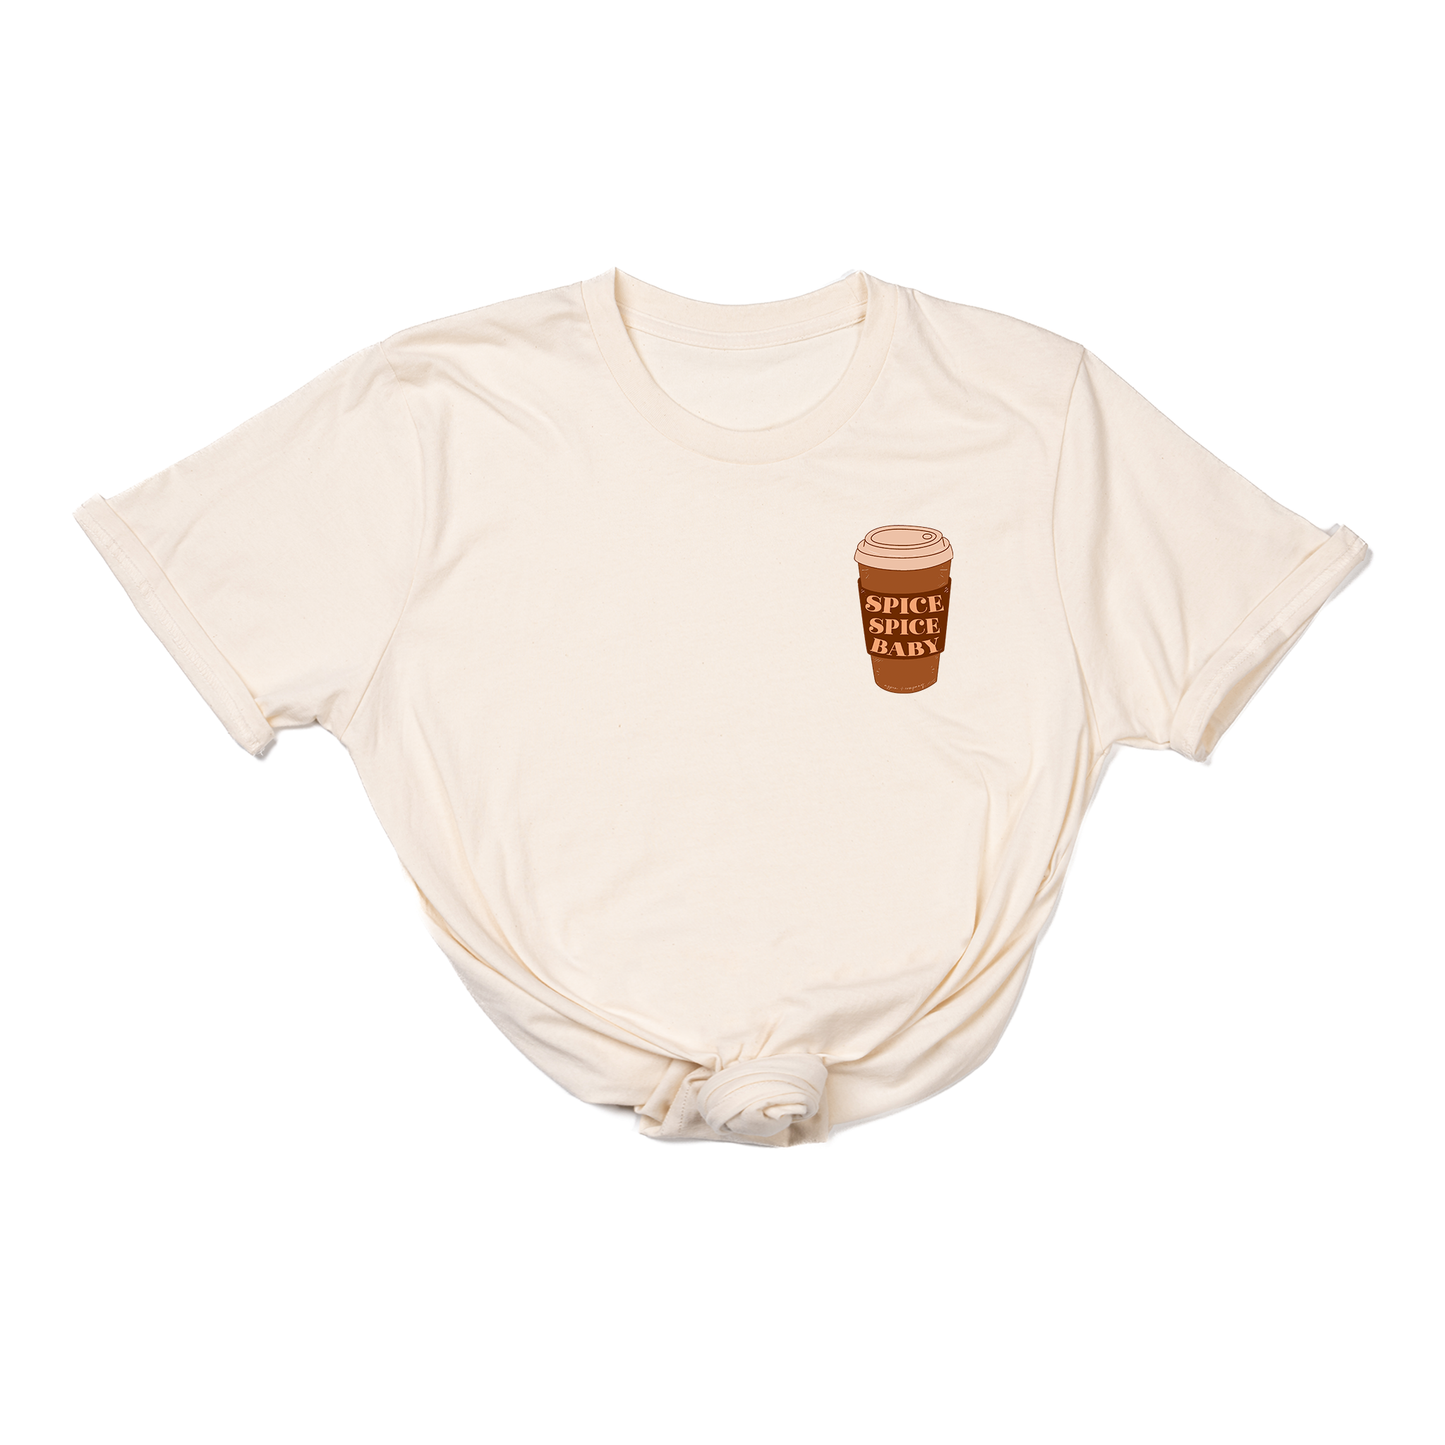 Spice Spice Baby - Tee (Natural)